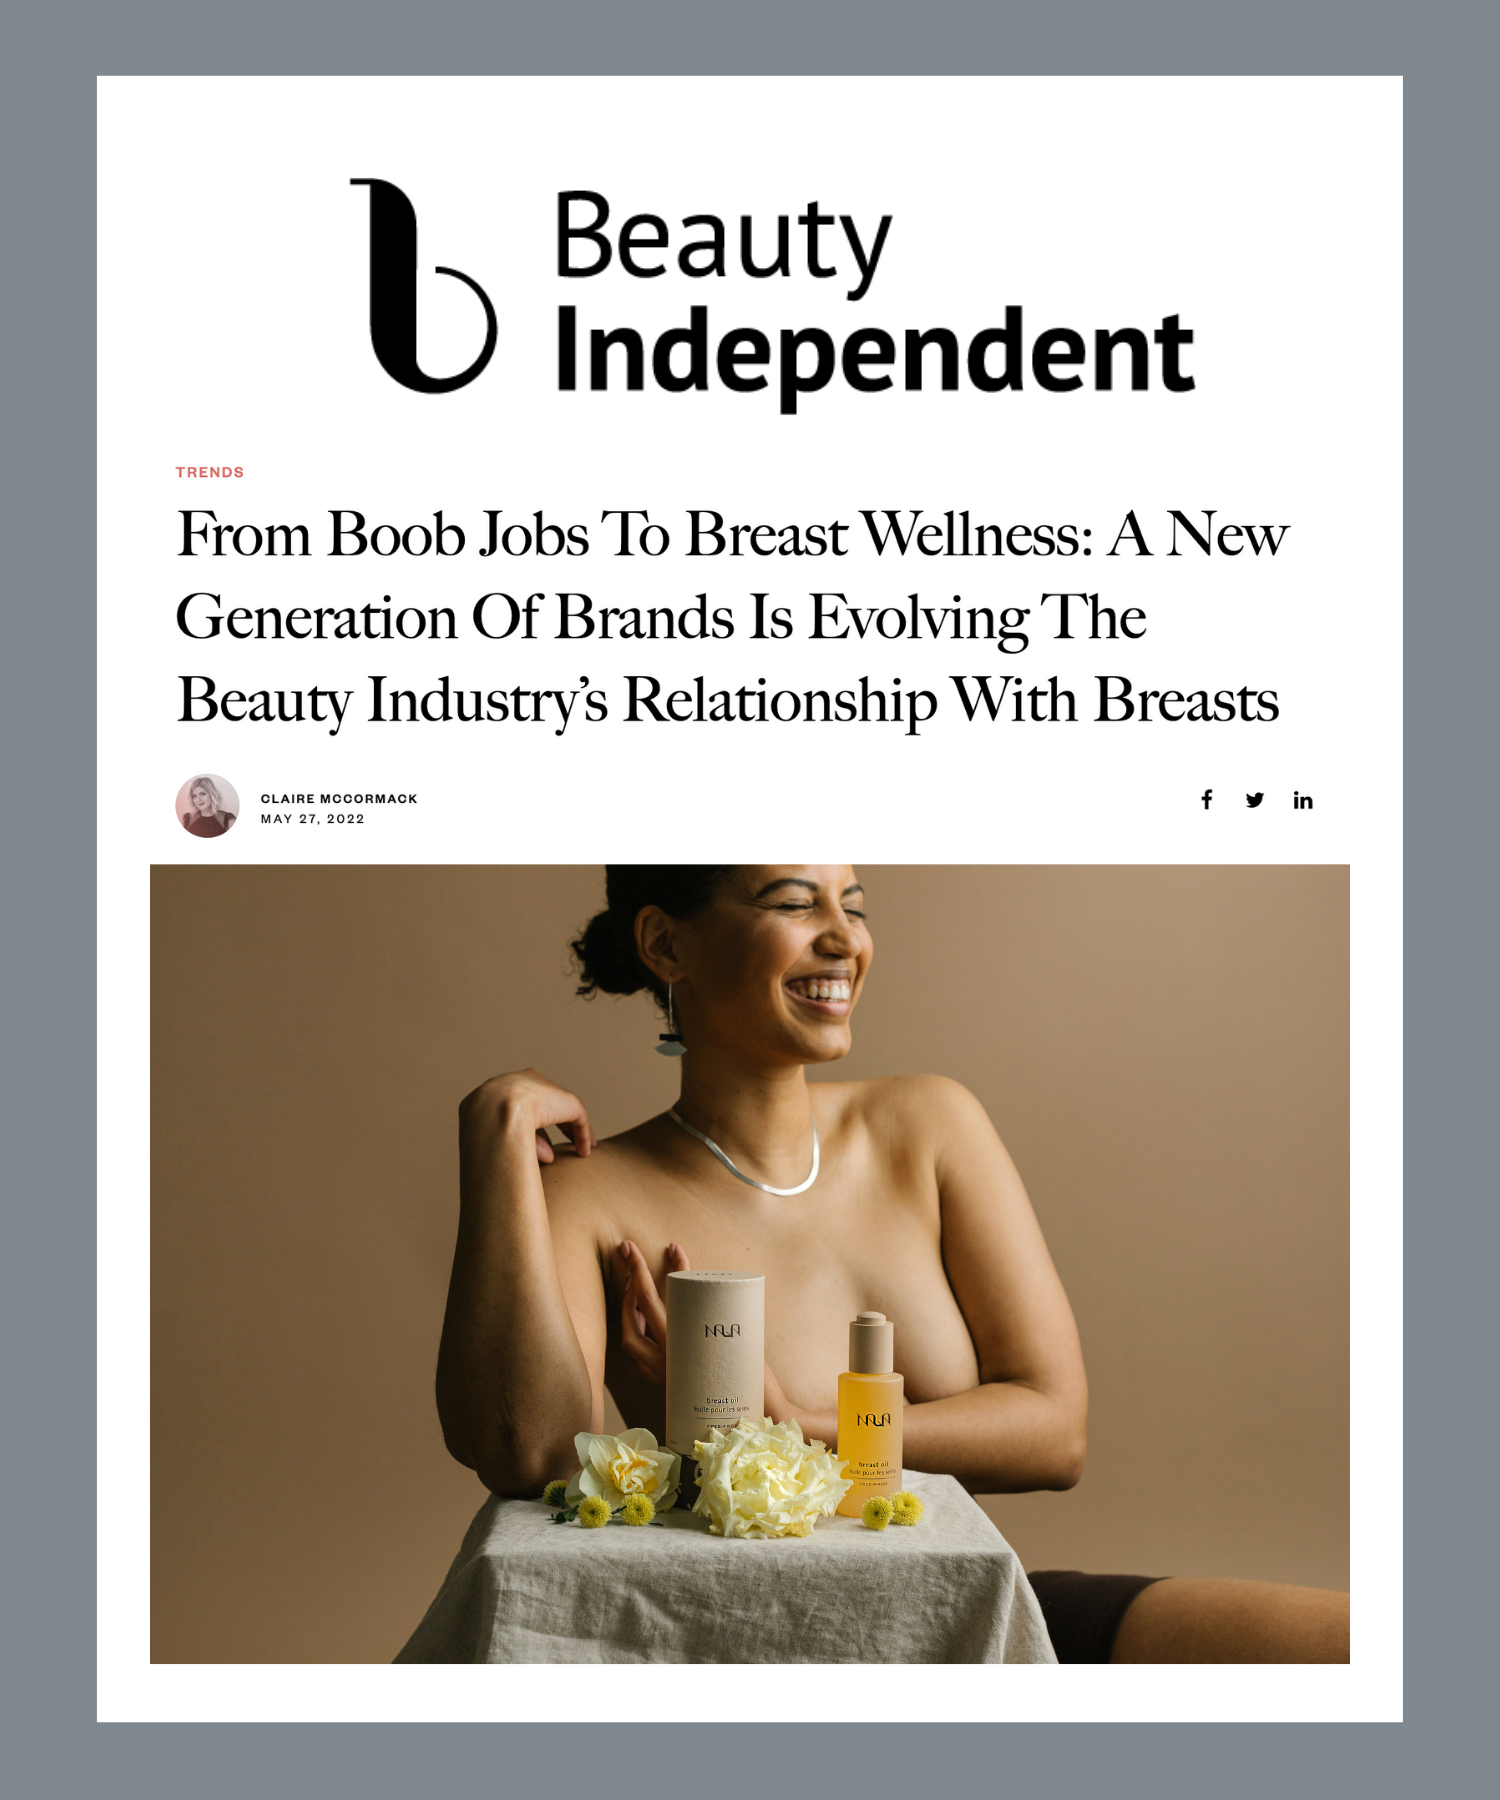 Beauty Independent: From Boob Jobs To Breast Wellness: A New Generation Of Brands Is Evolving The Beauty Industry’s Relationship With Breasts